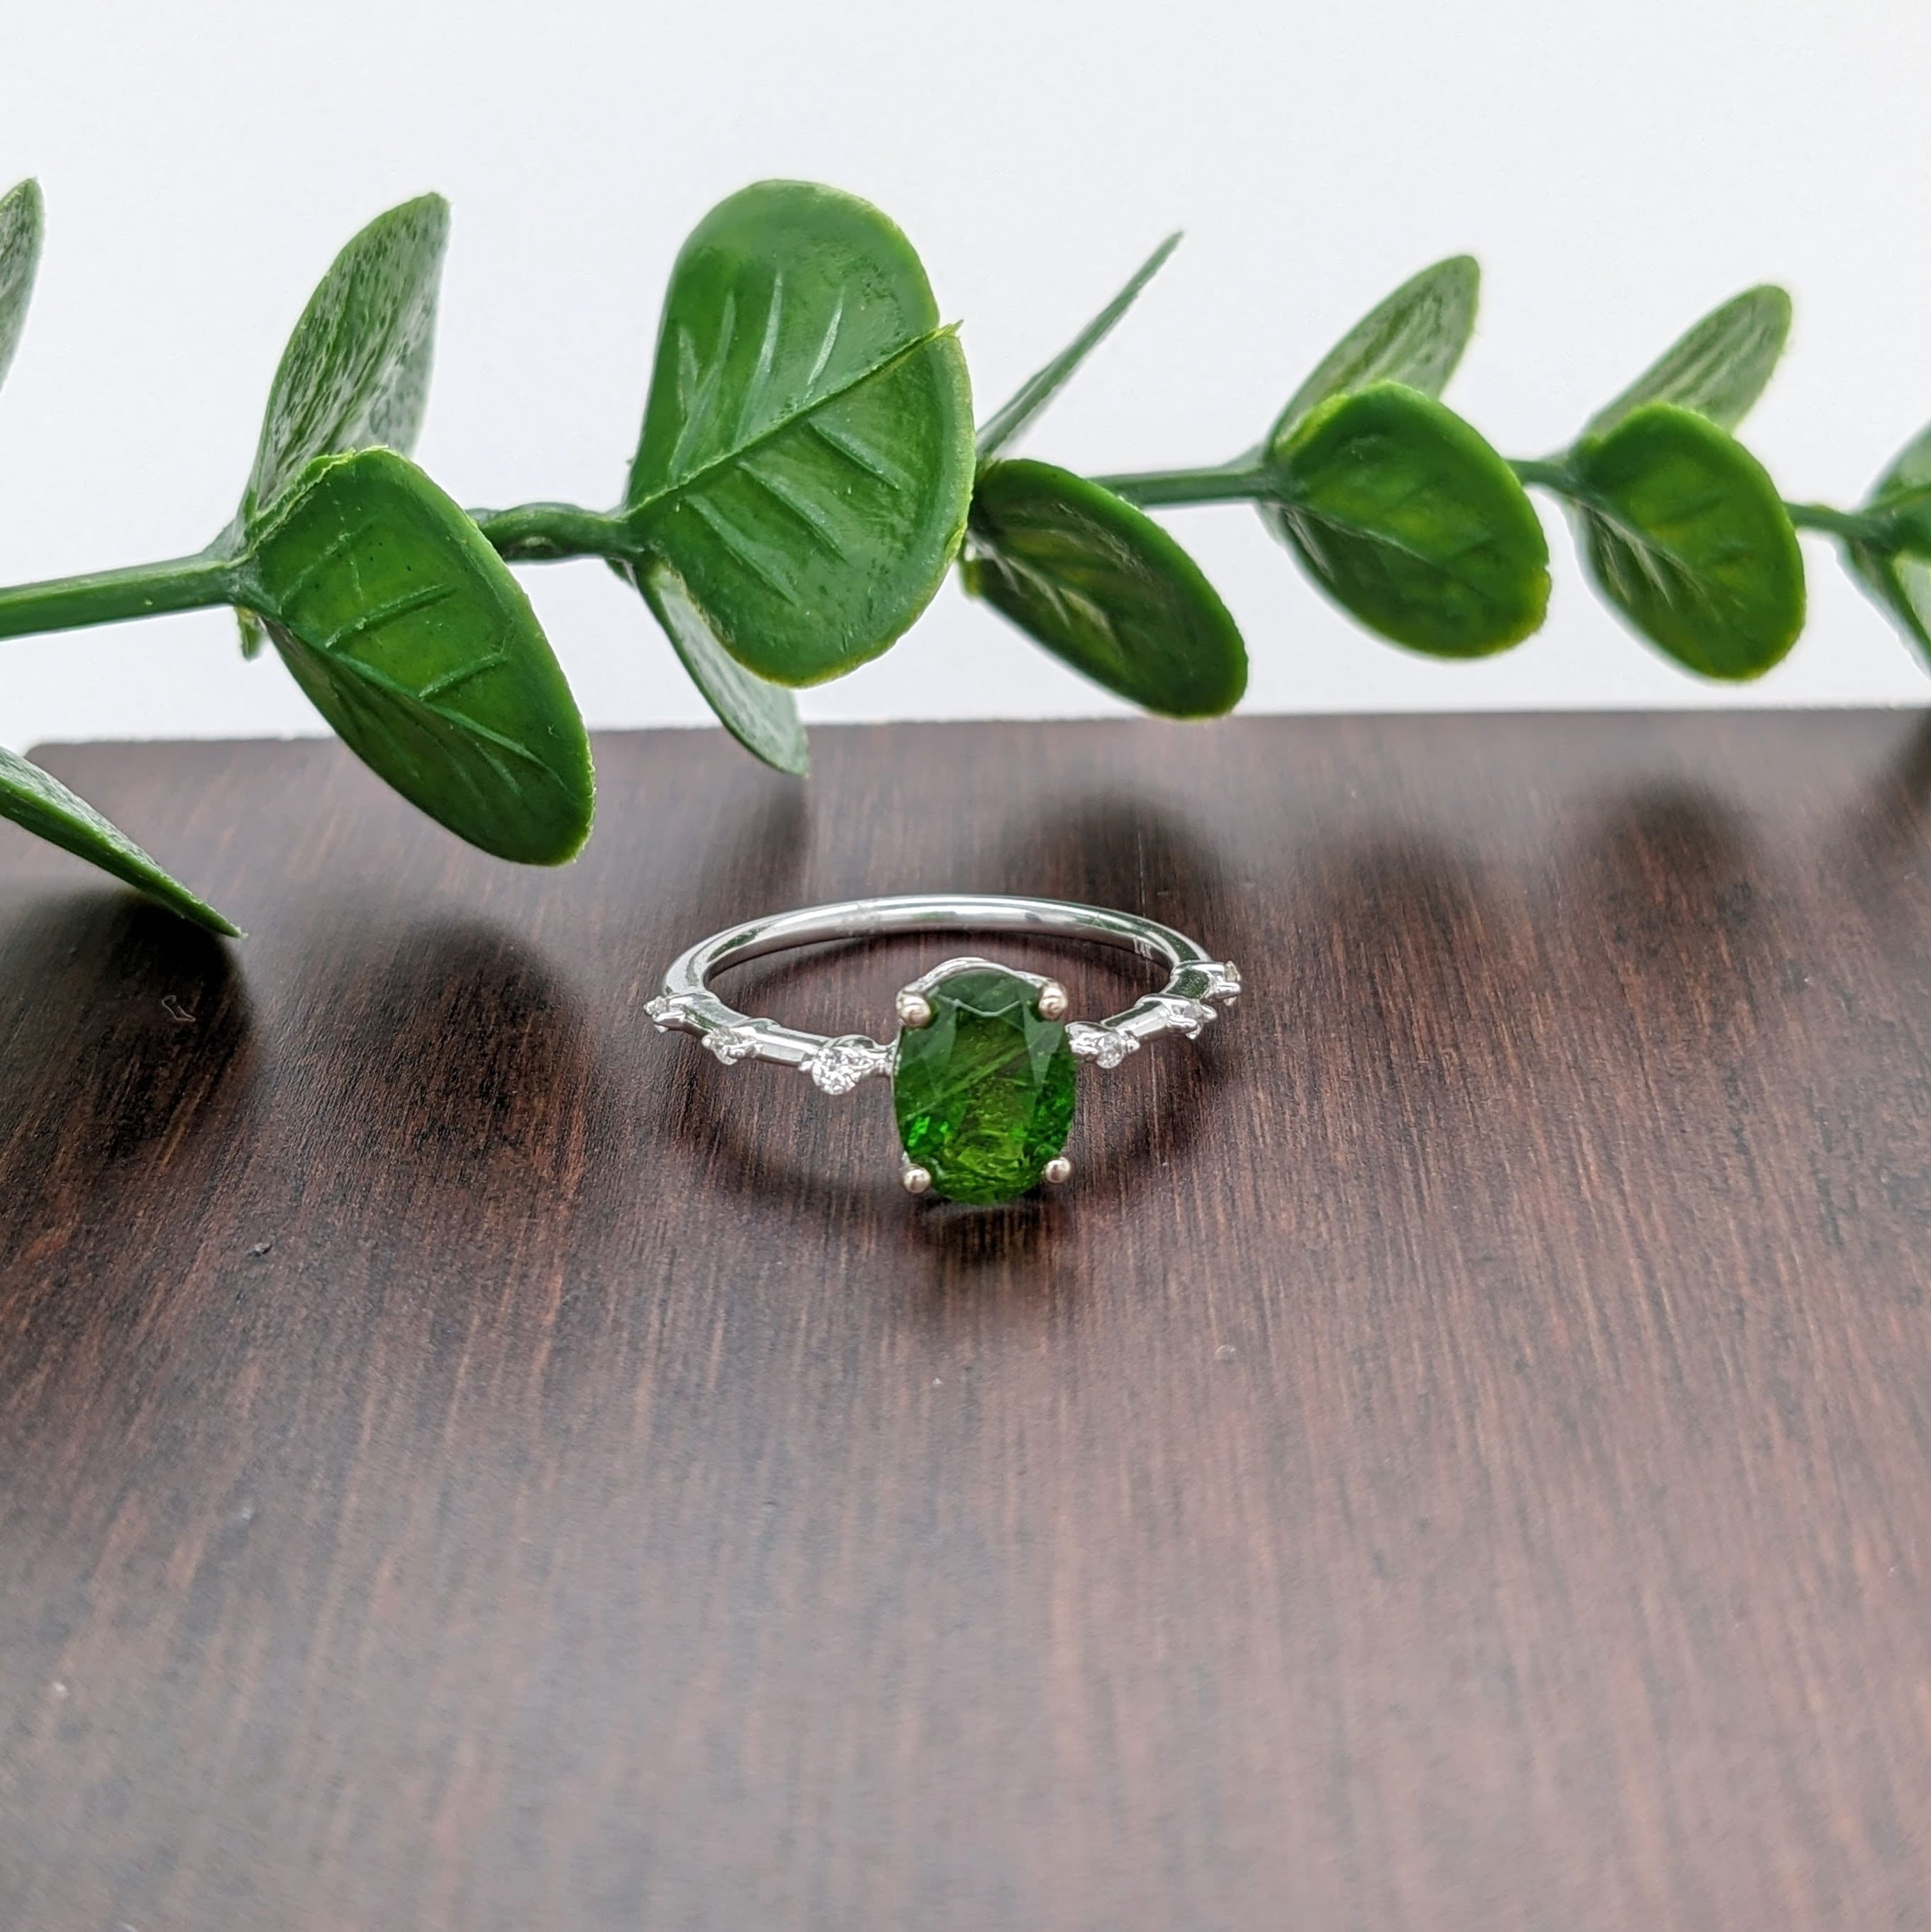 Minimalist Green Tsavorite Ring with All Natural Diamond Accents in Solid 14k White Gold | Dainty | Green Garnet | January Birthstone